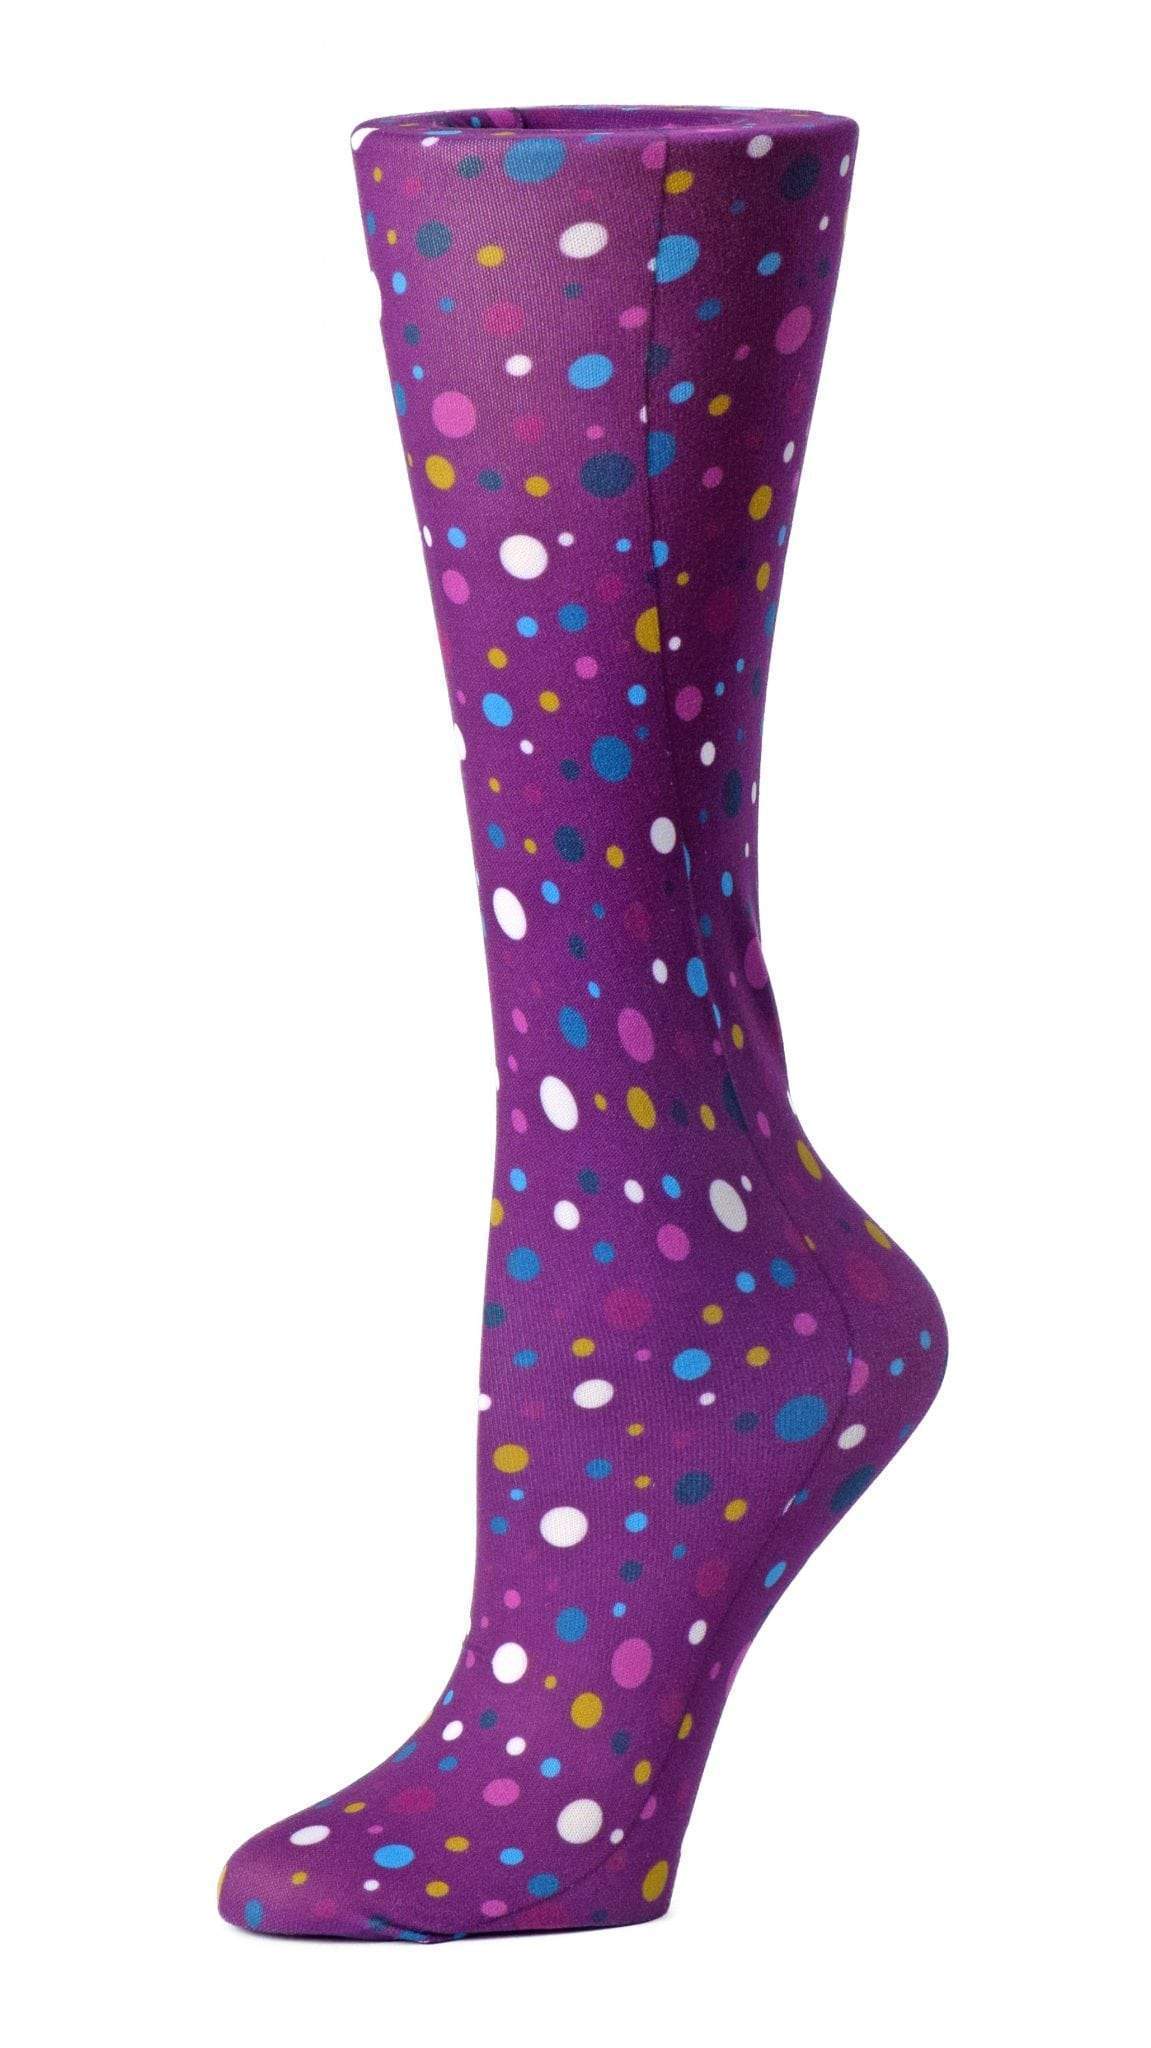 Cutieful Moderate Compression Socks 10-18 MMhg Wide Calf Knit Print Pattern Abstract Polka Dots at Parker's Clothing and Shoes.